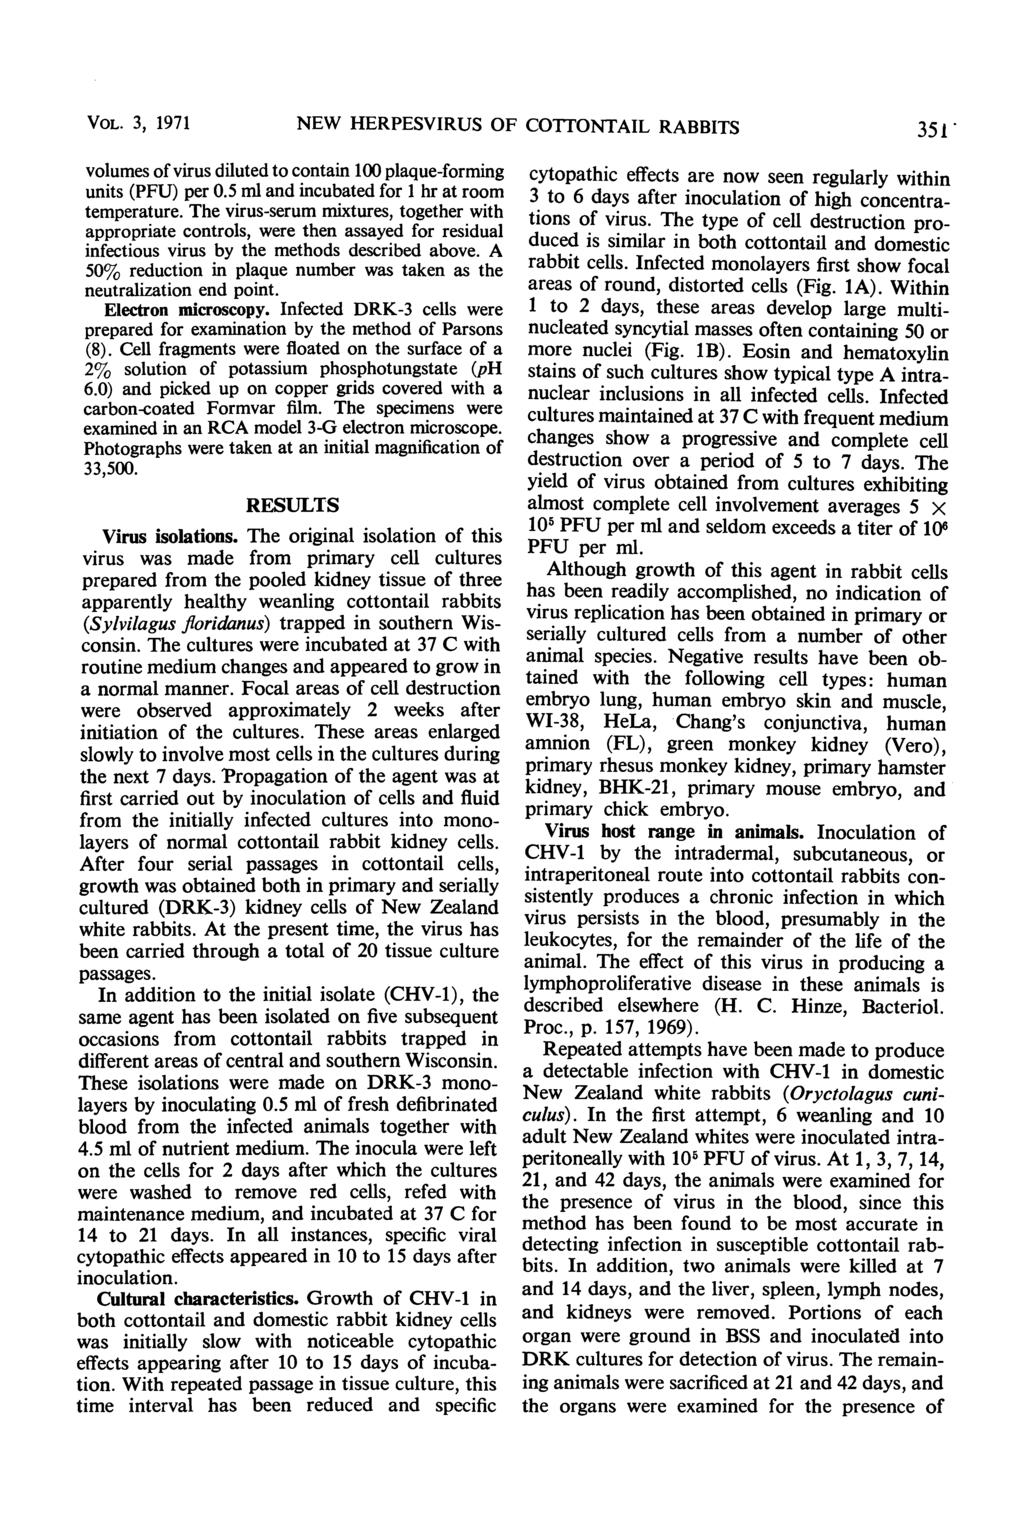 VOL. 3, 1971 NEW HERPESVIRUS OF COITONTAIL RABBITS 351' volumes of virus diluted to contain 100 plaque-forming units (PFU) per 0.5 ml and incubated for 1 hr at room temperature.